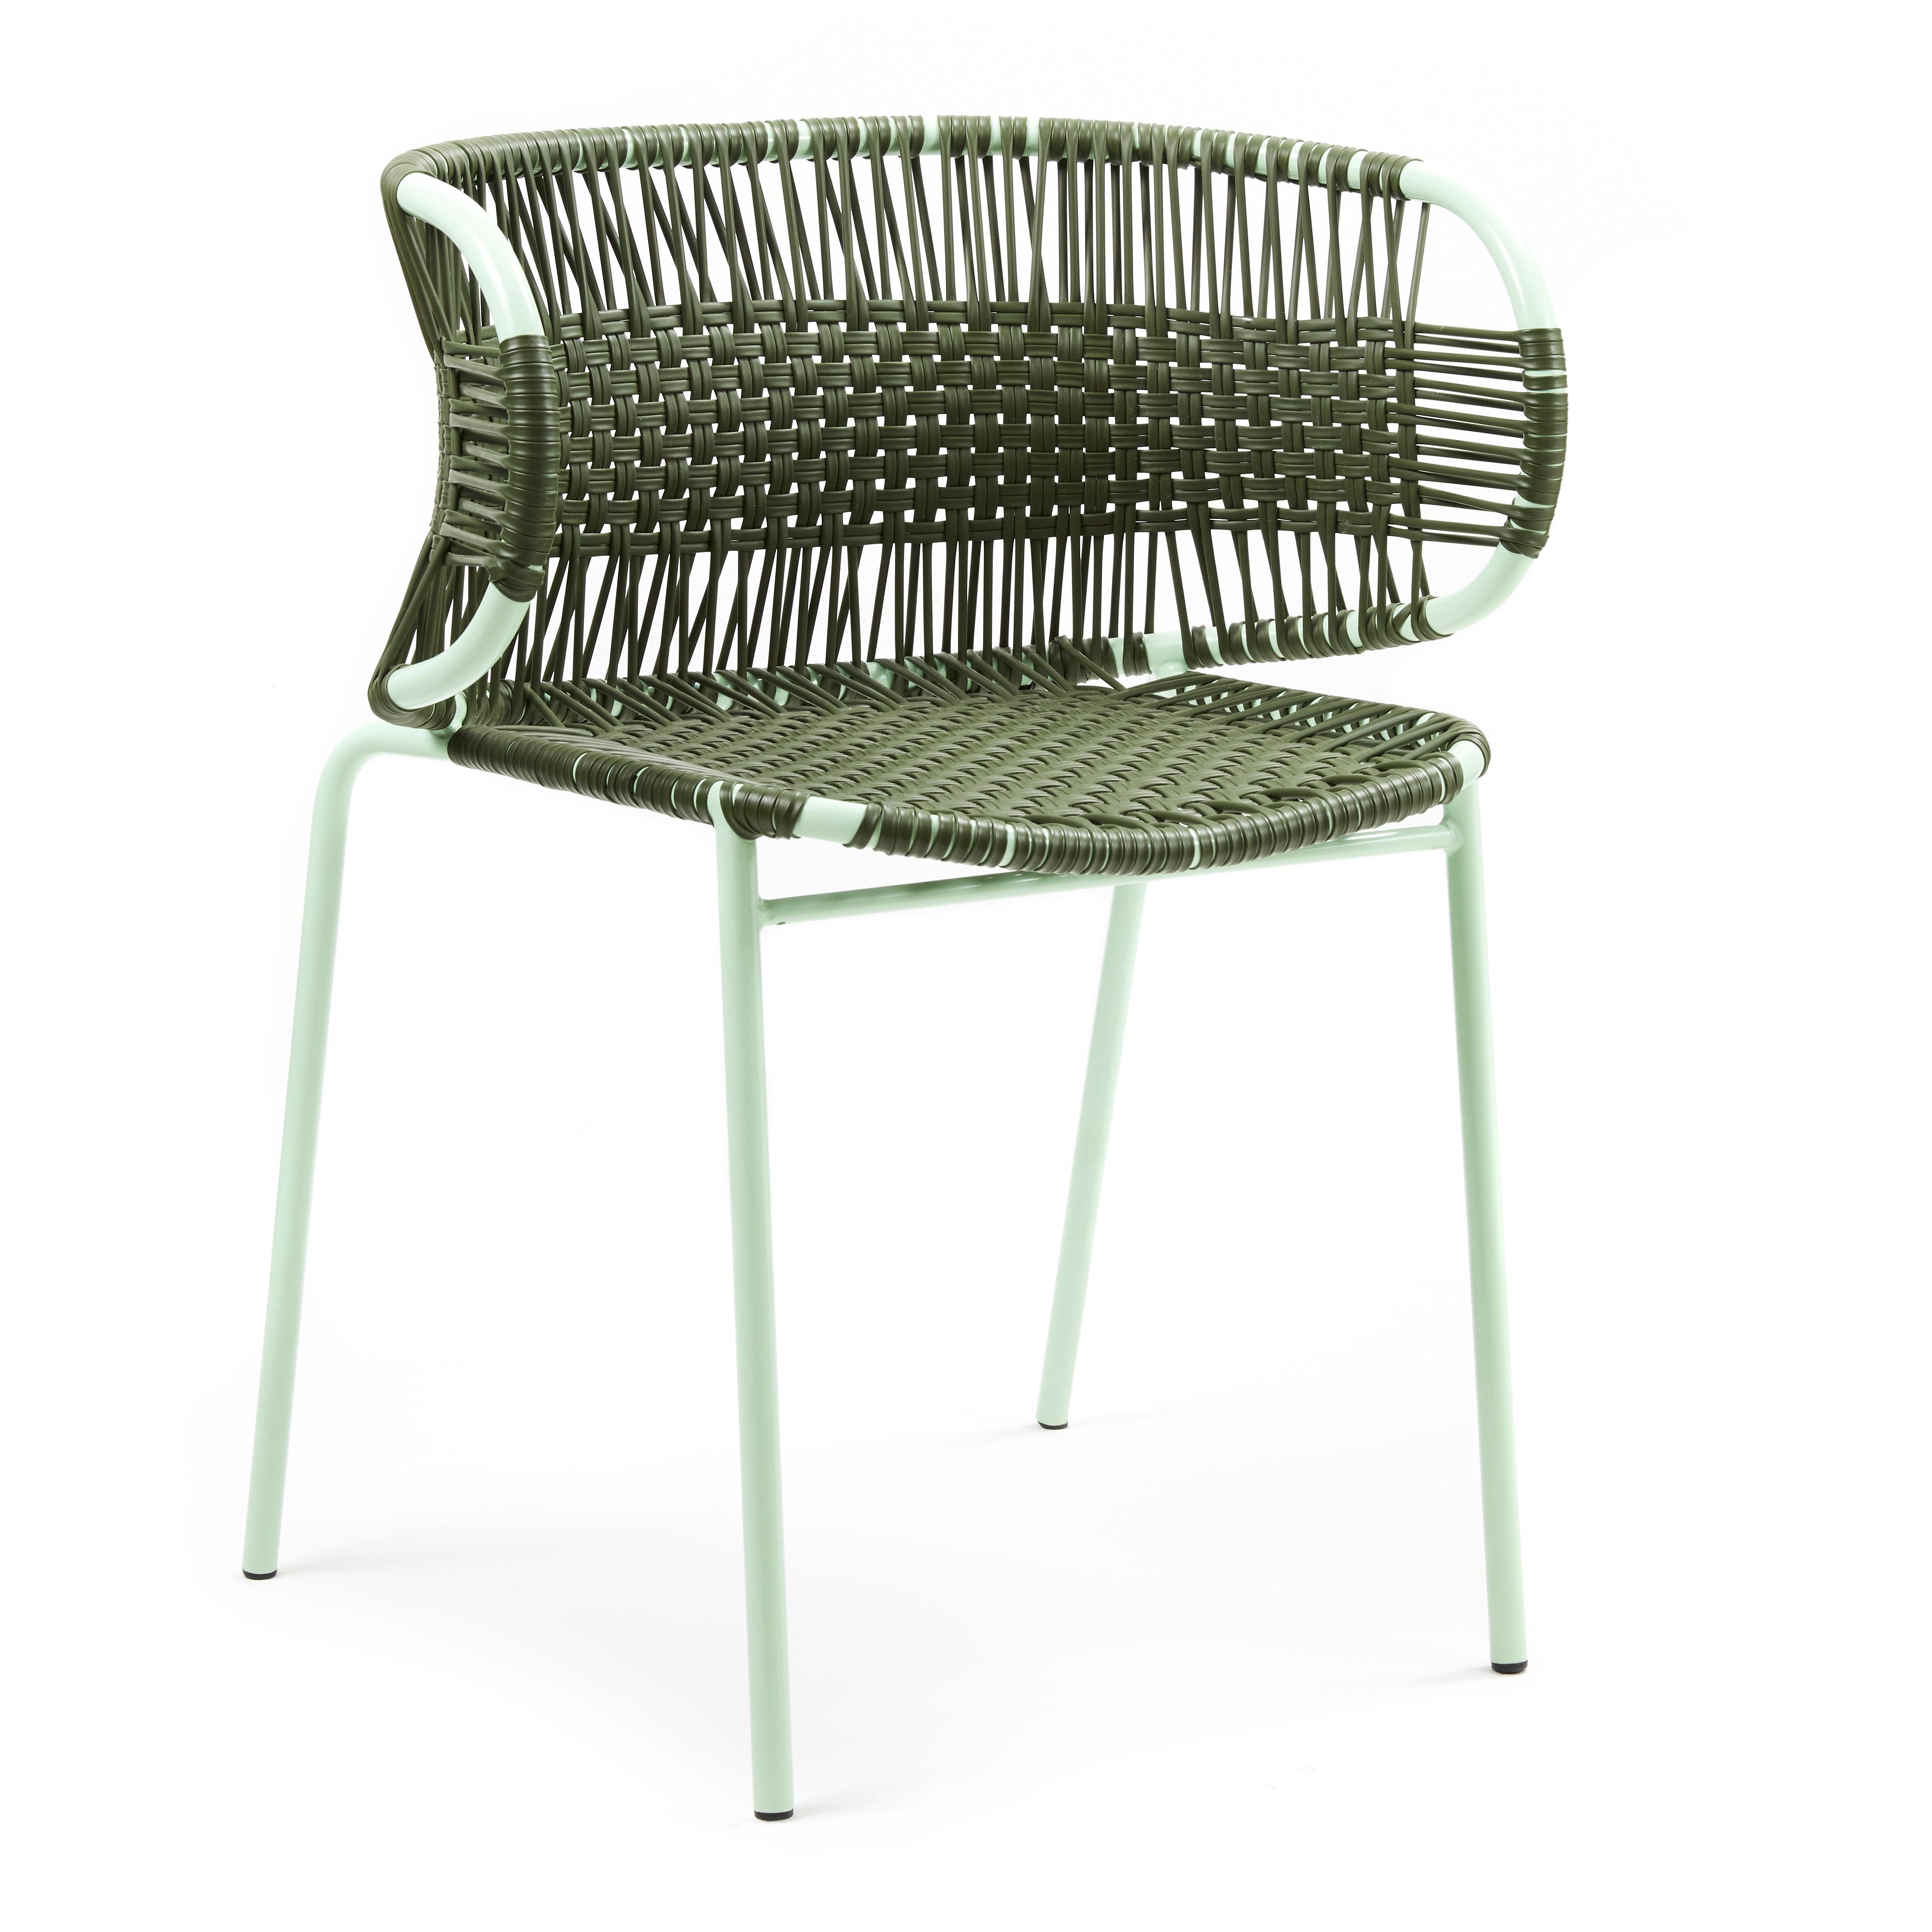 Set of 2 olive Cielo stacking chair with armrest by Sebastian Herkner.
Materials: galvanized and powder-coated tubular steel. PVC strings are made from recycled plastic.
Technique: made from recycled plastic and weaved by local craftspeople in